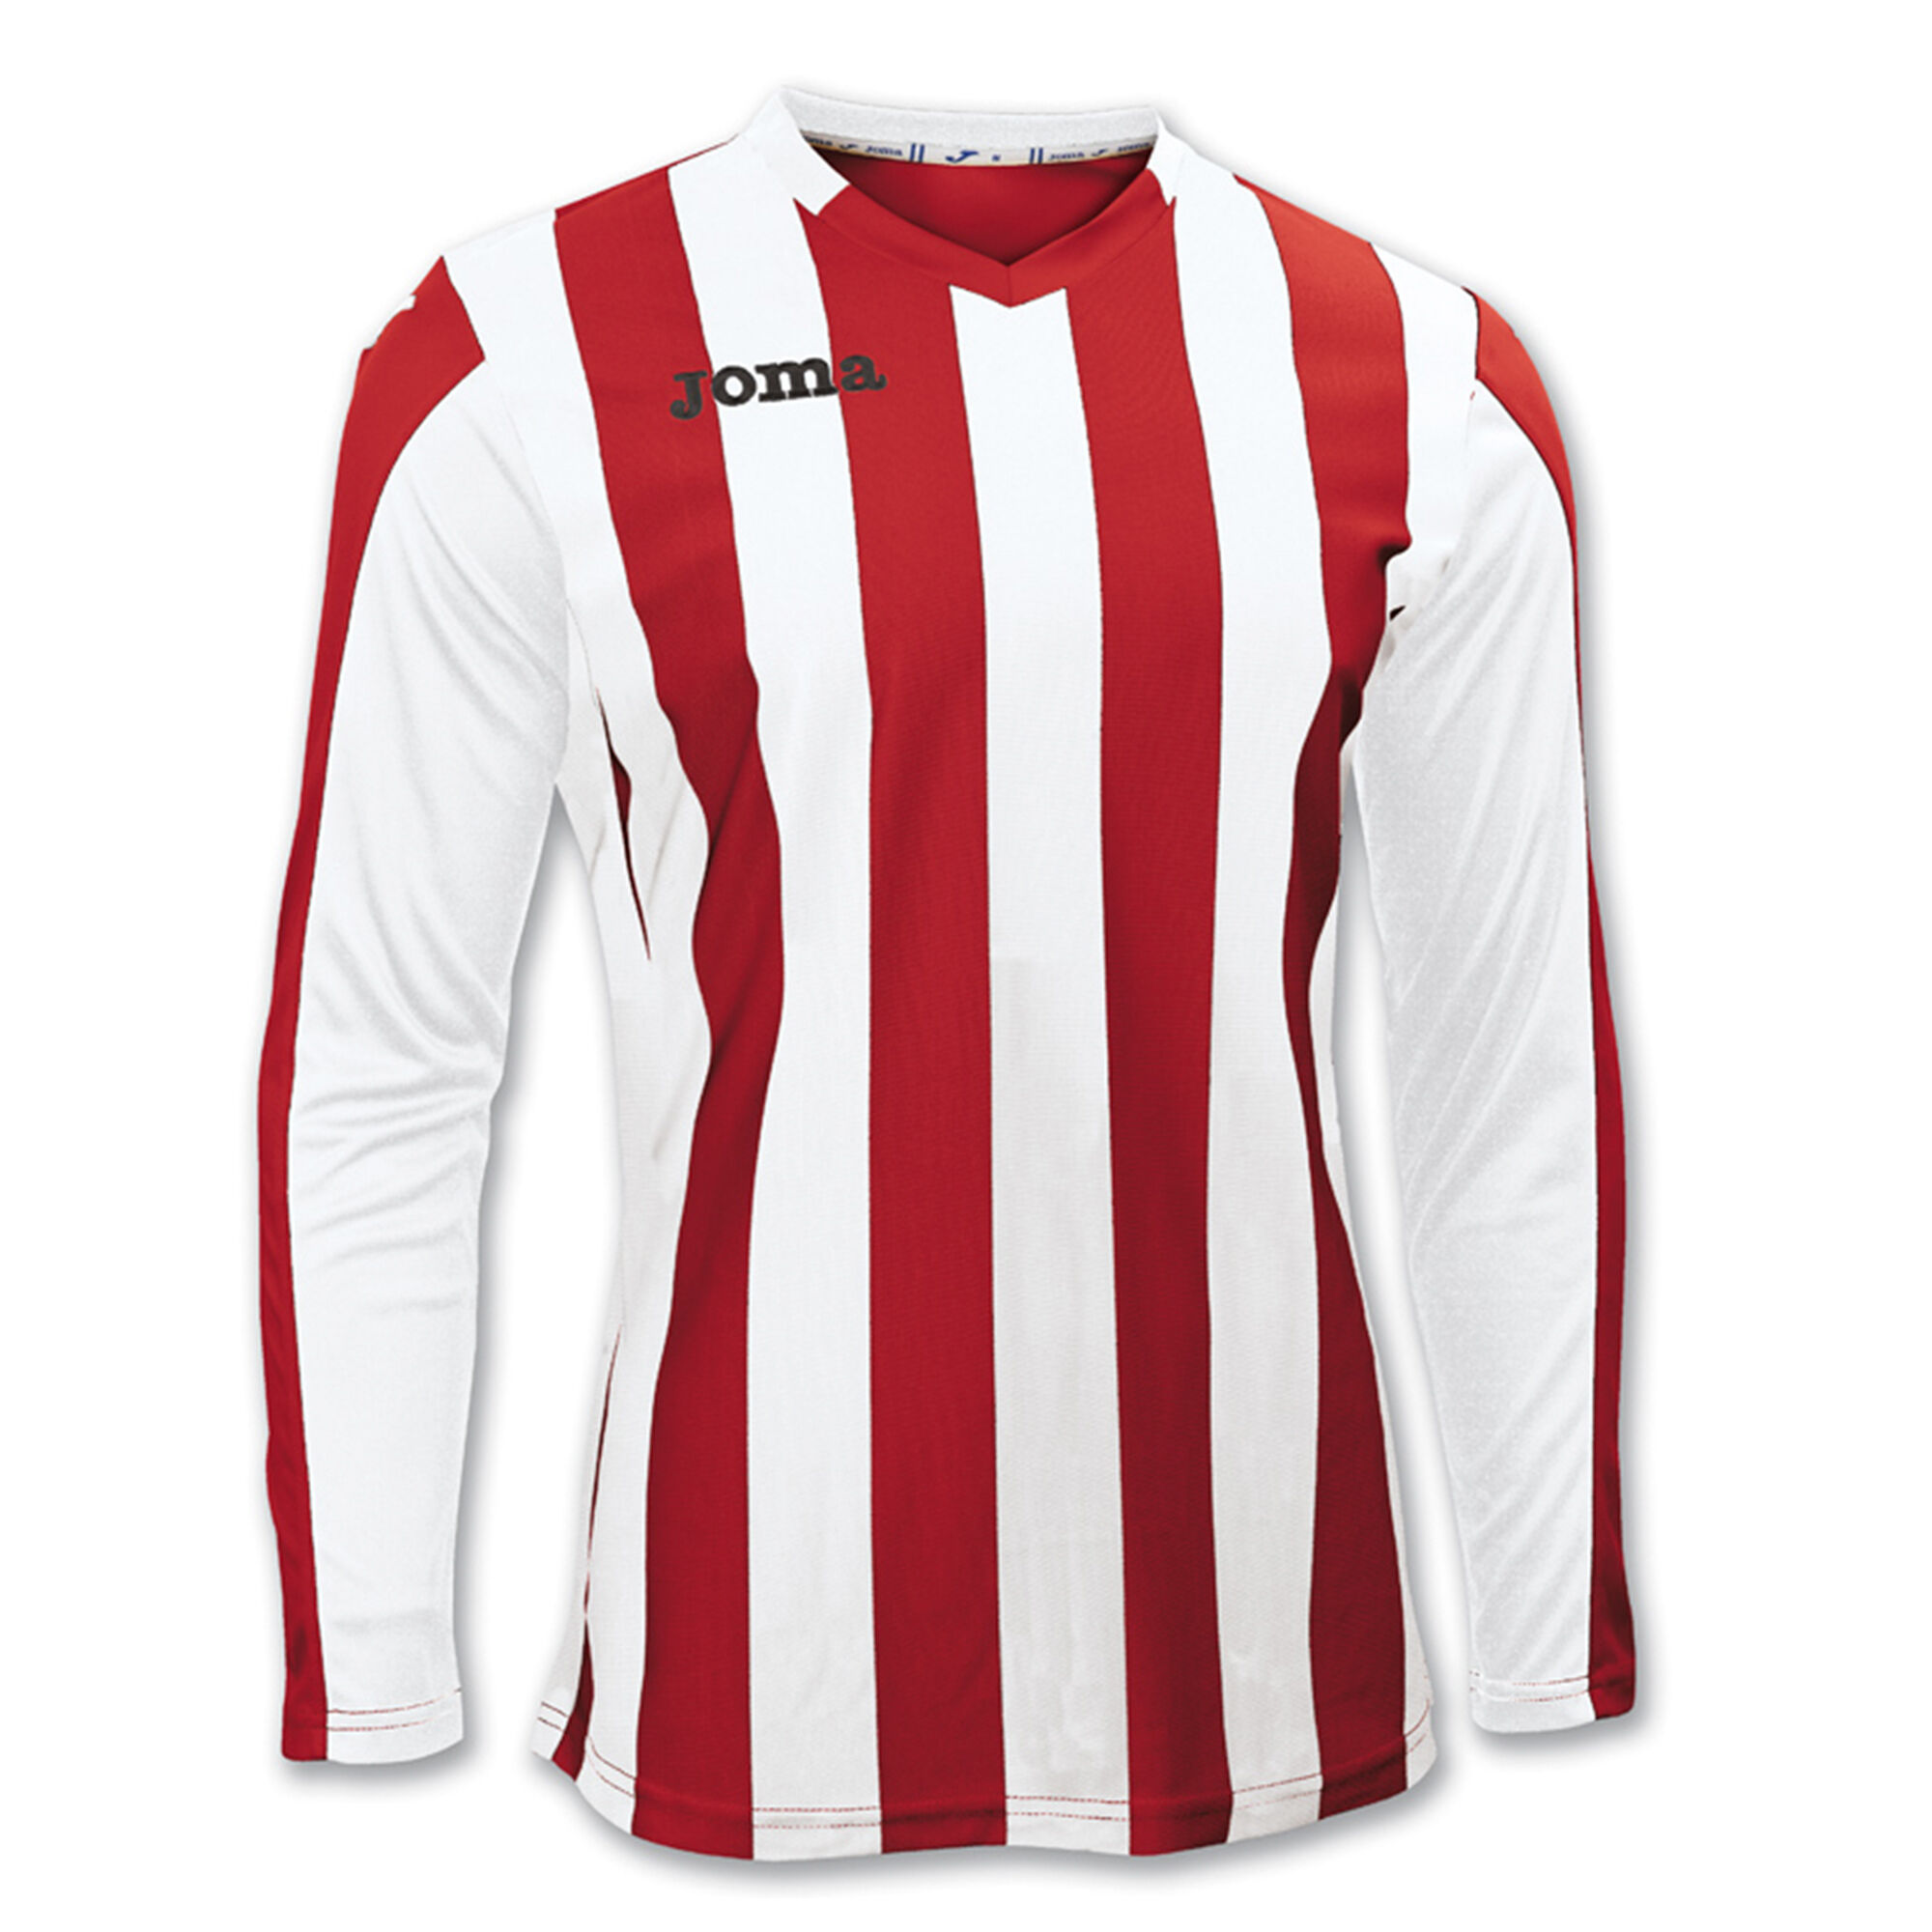 MAILLOT MANCHES LONGUES HOMME COPA ROUGE BLANC